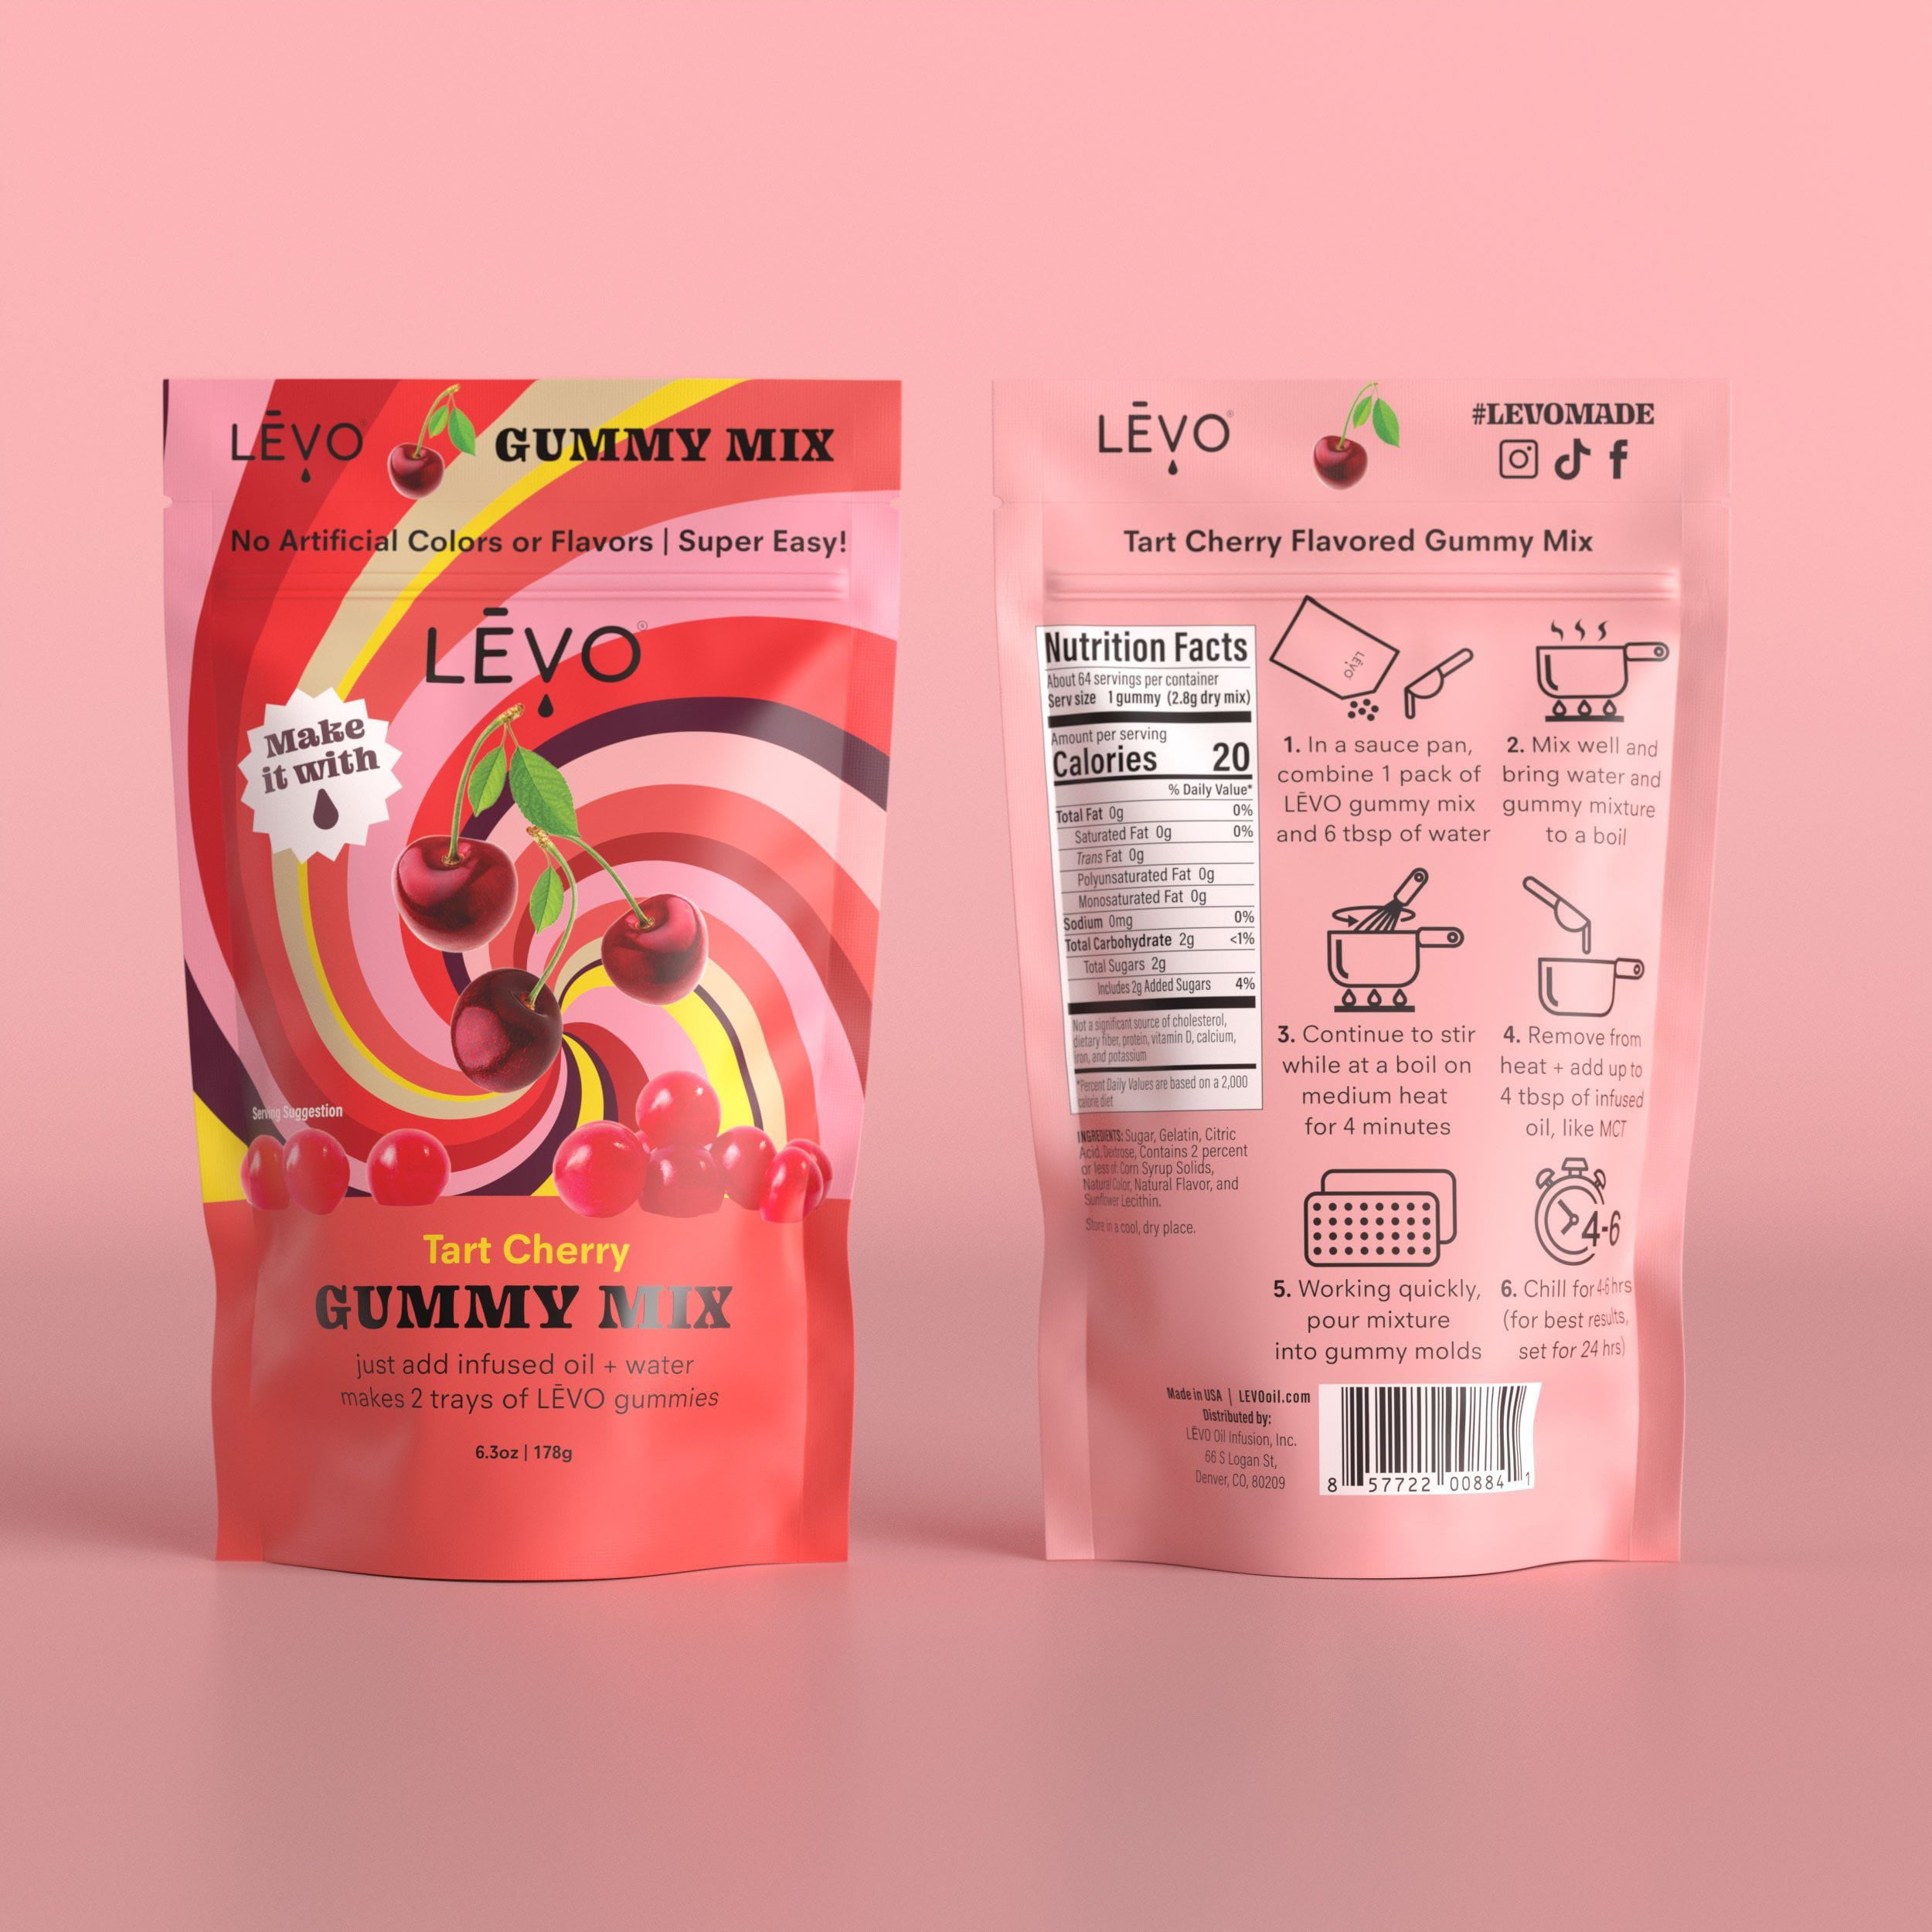 LEVO Tart Cherry gummy mix is what you need for an elevated weekend with friends, holiday celebration, or for weeknight relaxation. Simply add the herbal infused oil of your choice, 6 tablespoons of water, and mix with heat. You now have your own potent gummies.